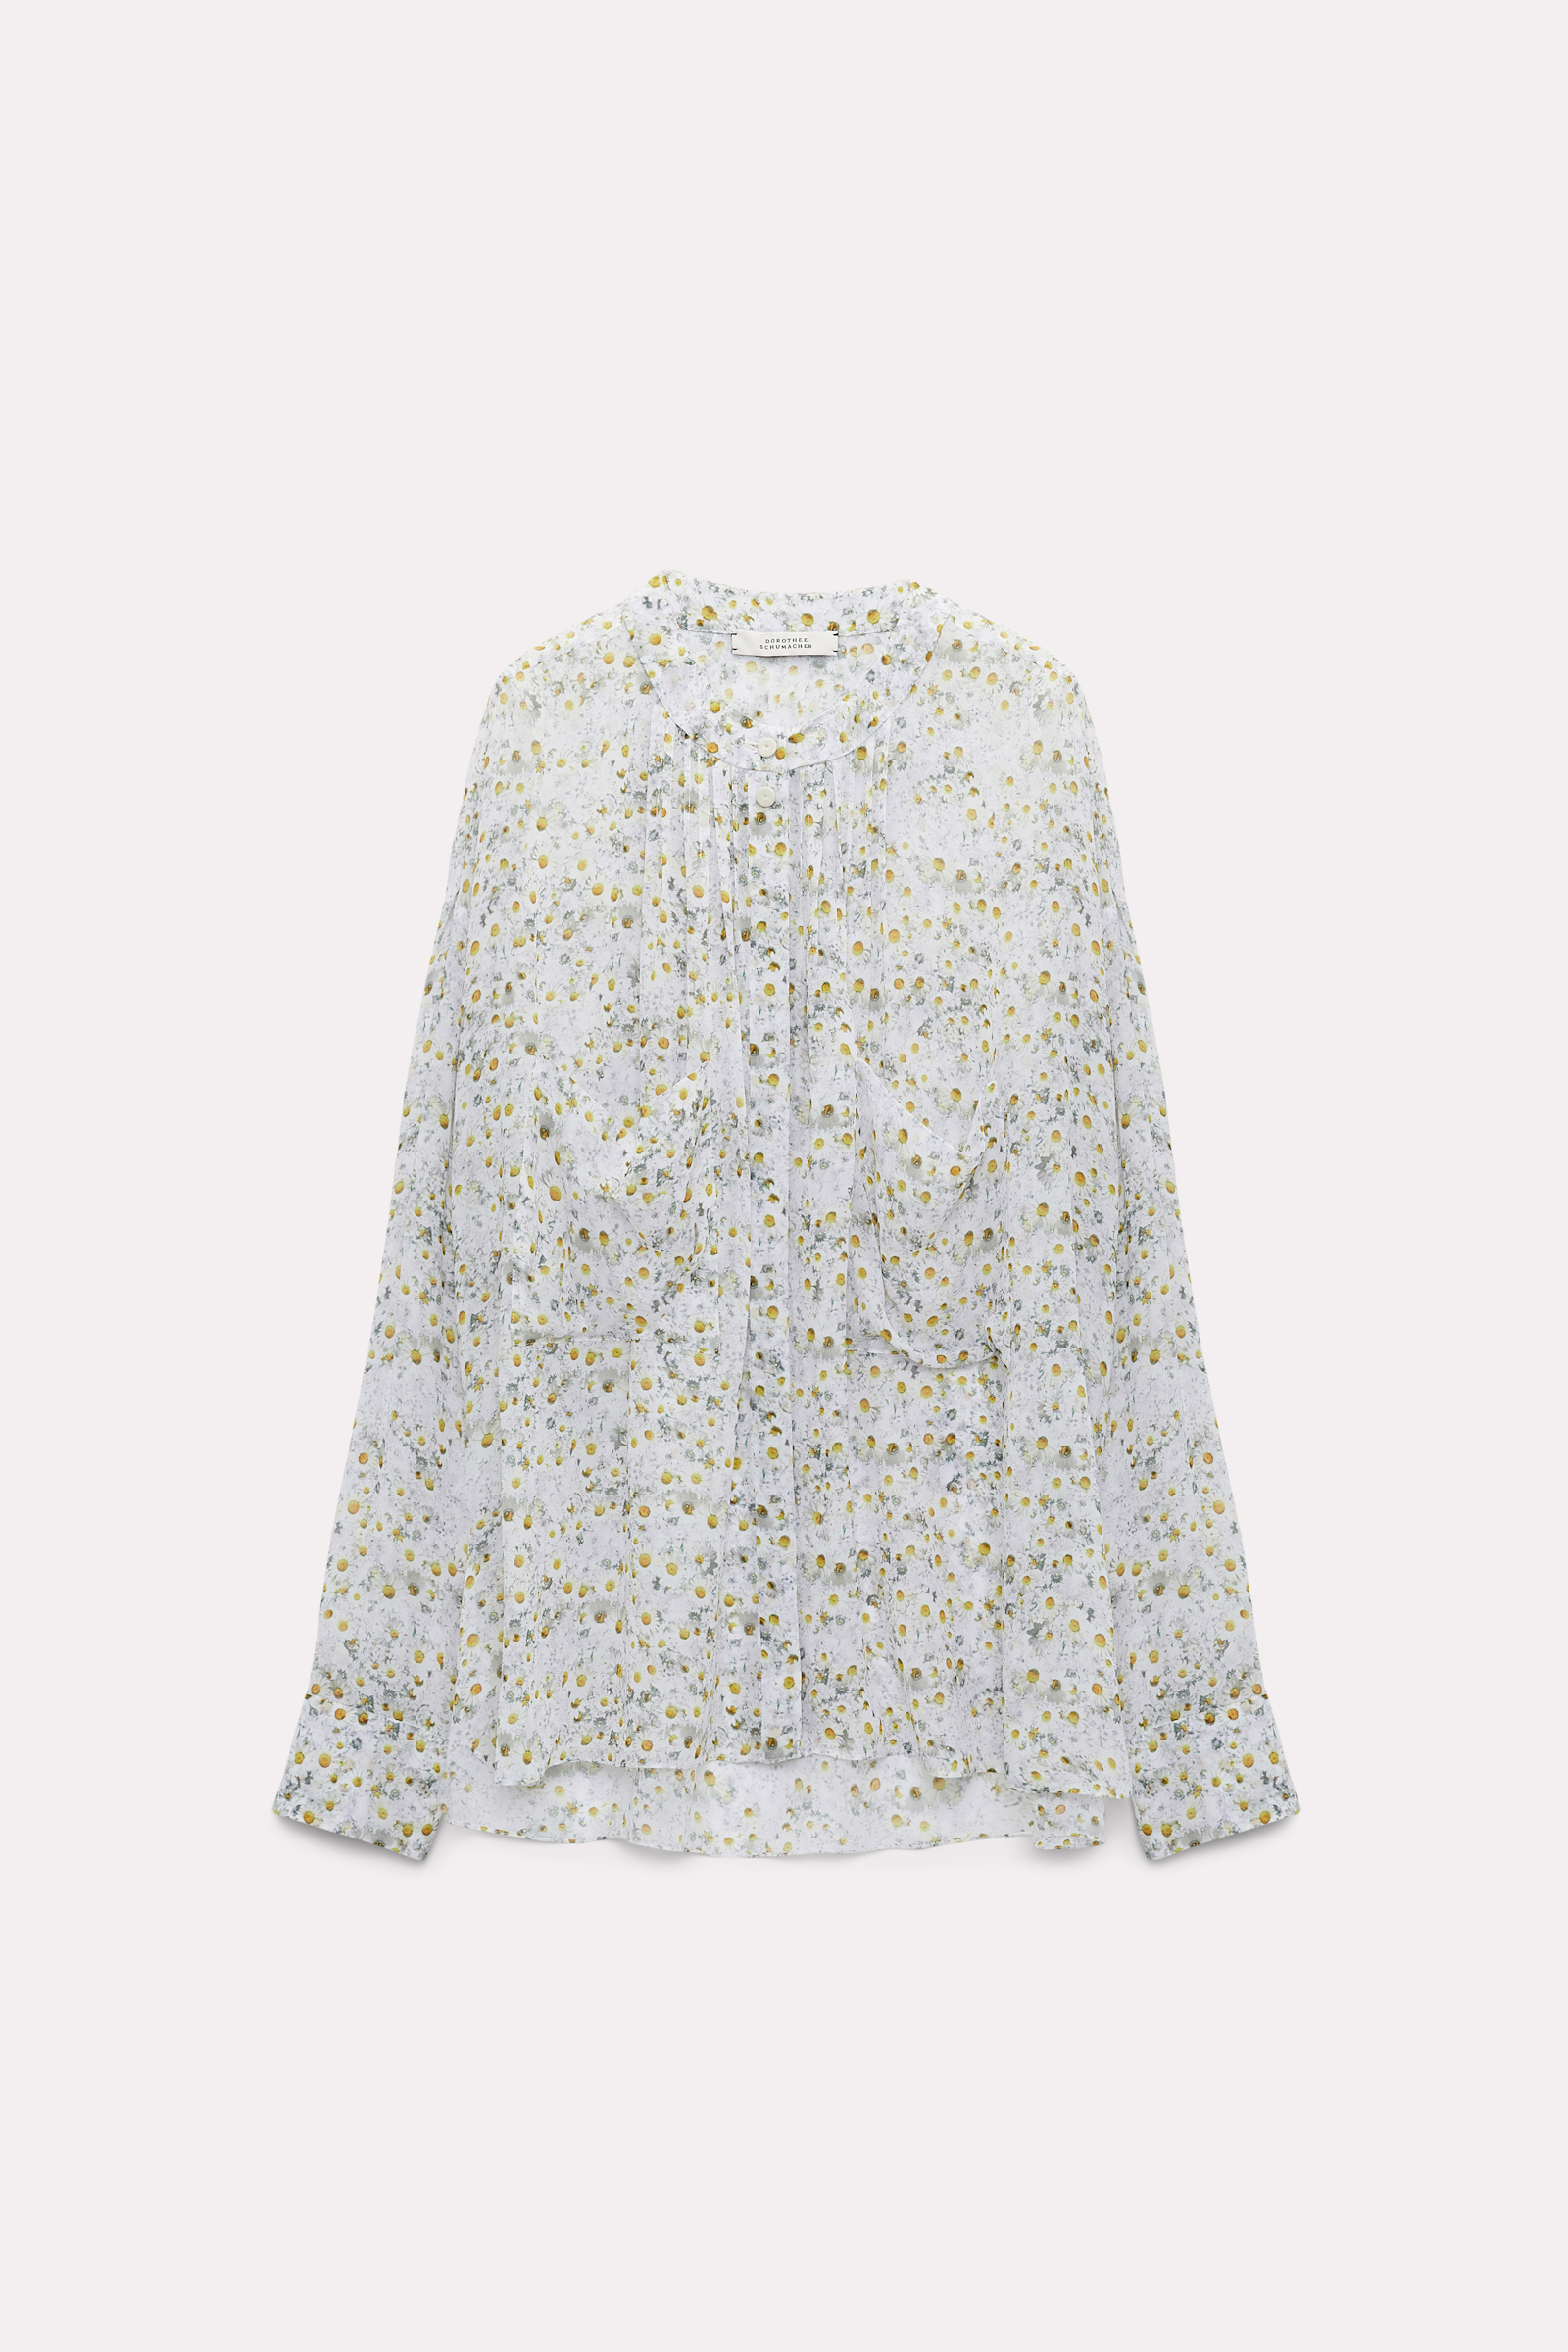 Dorothee Schumacher Daisy print blouse colorful flowers